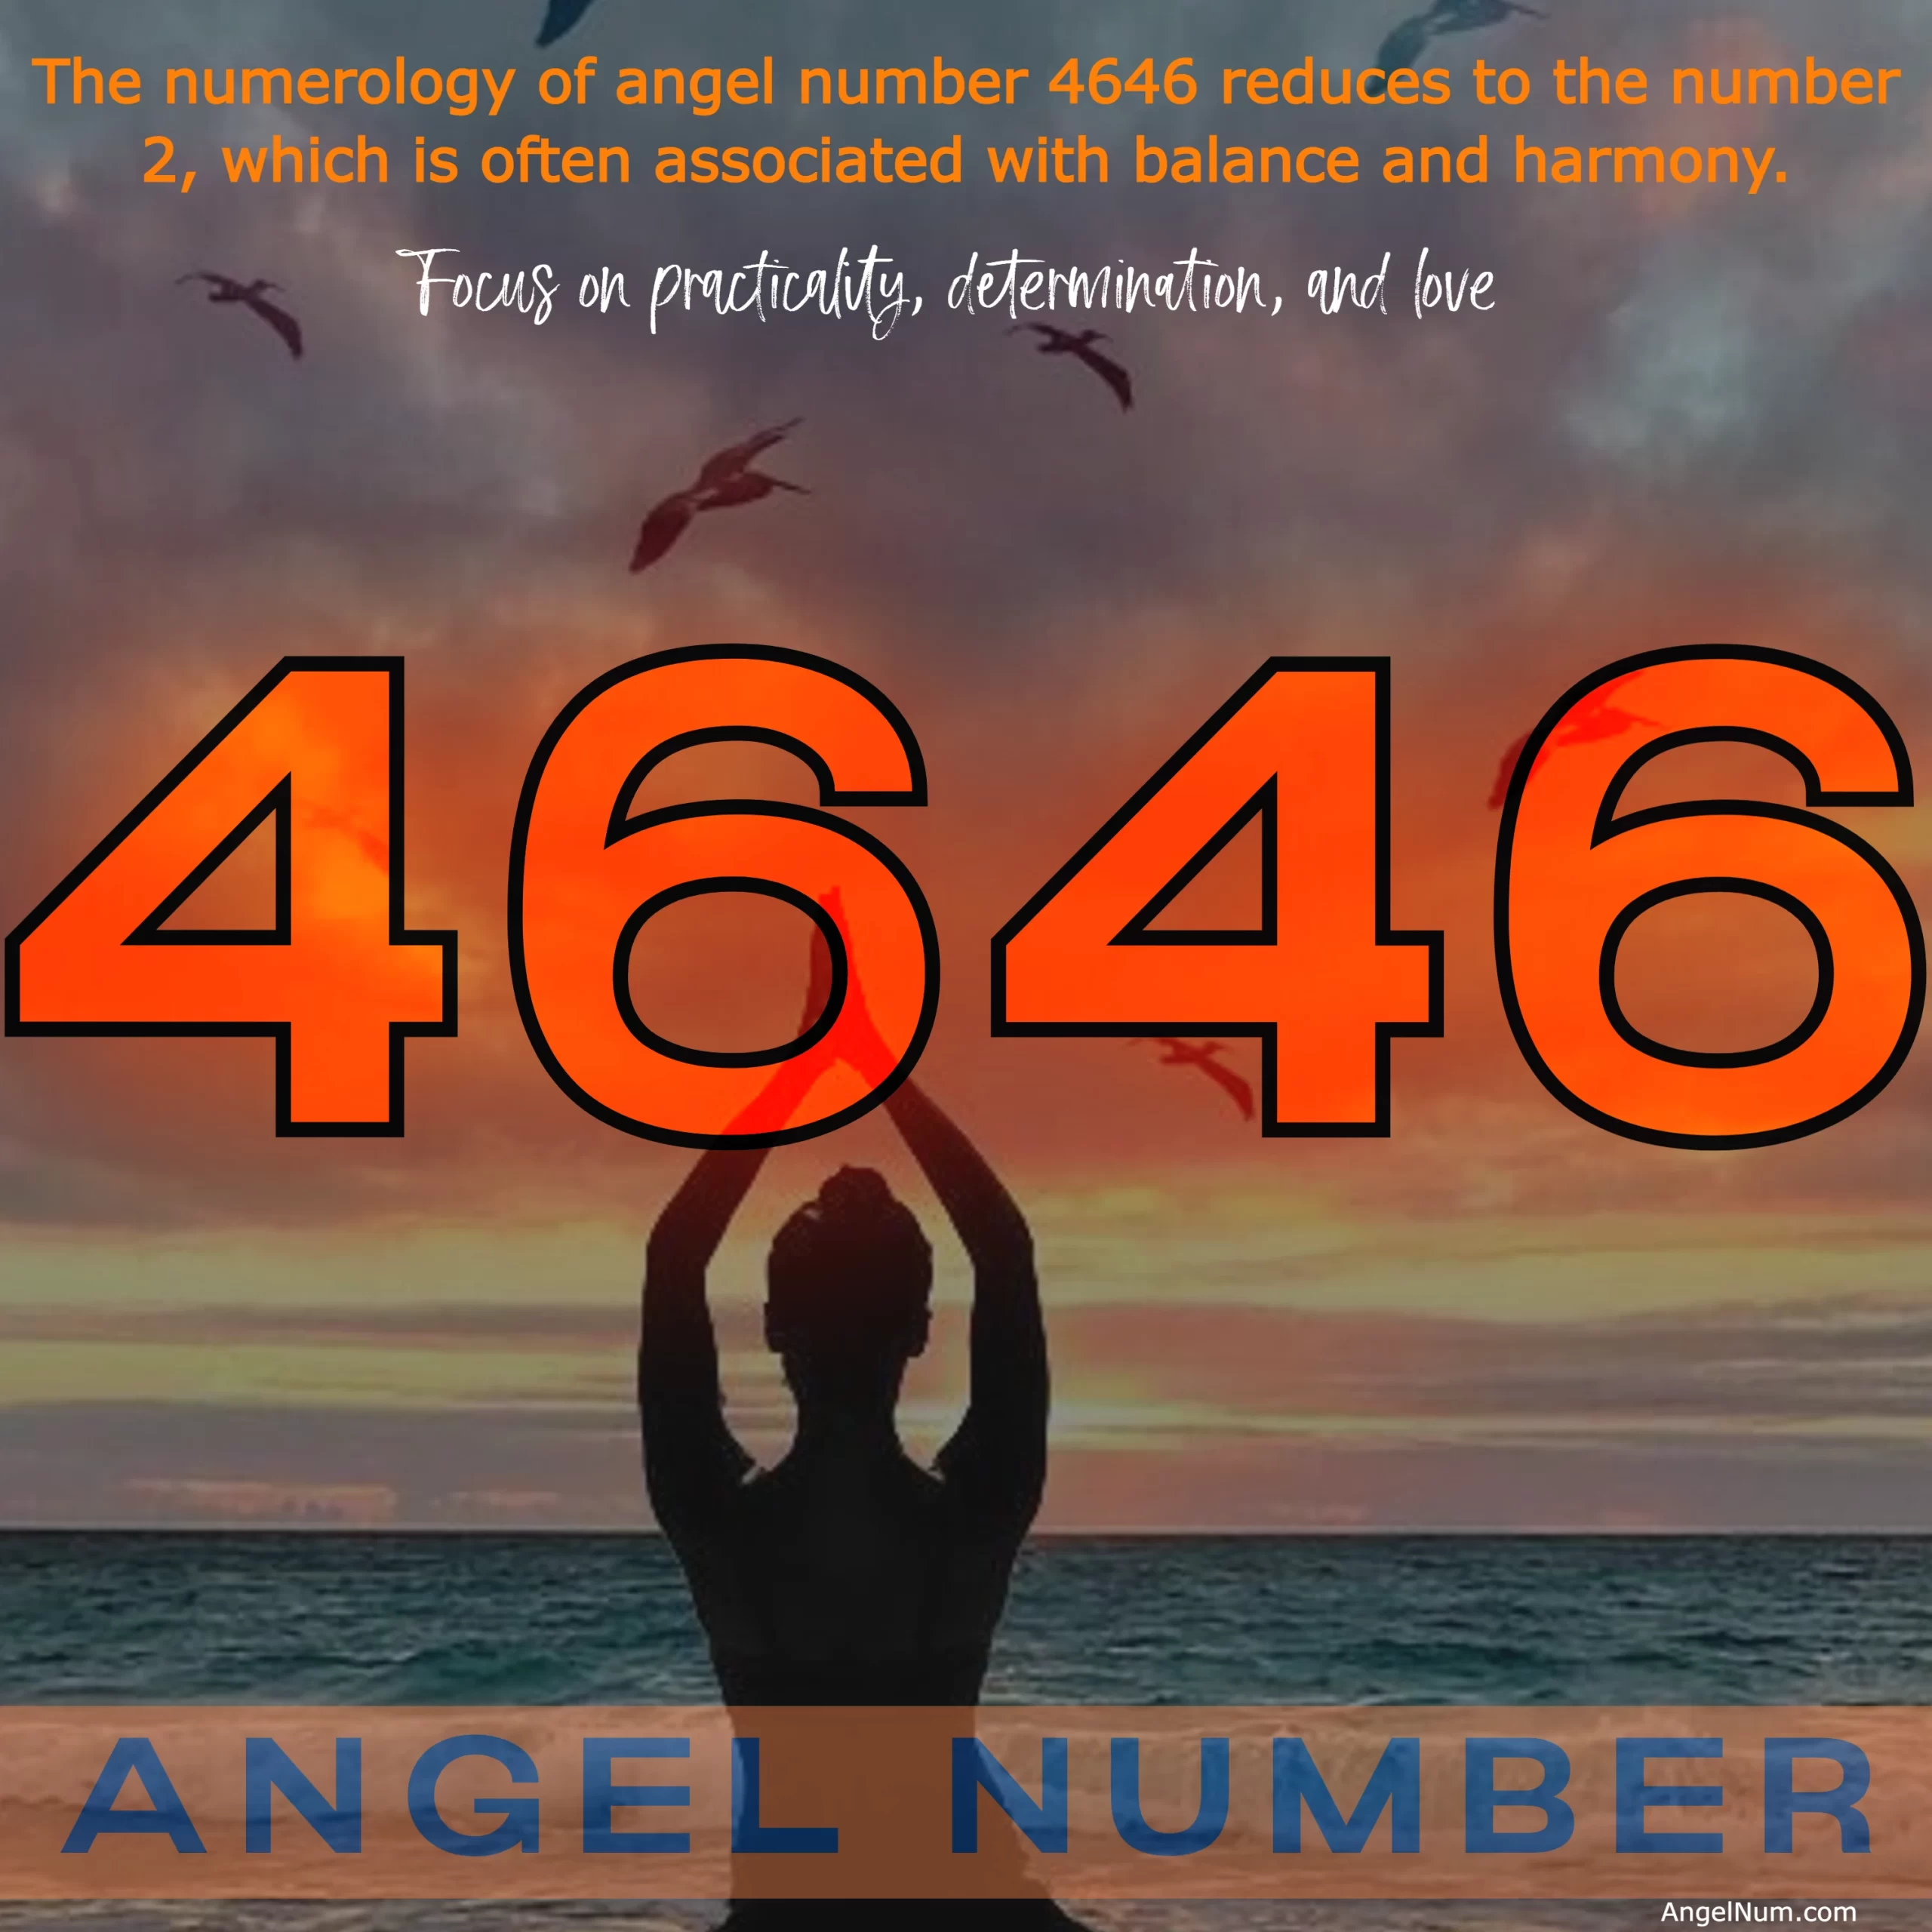 Angel Number 4646: Meaning, Numerology, and Symbolism